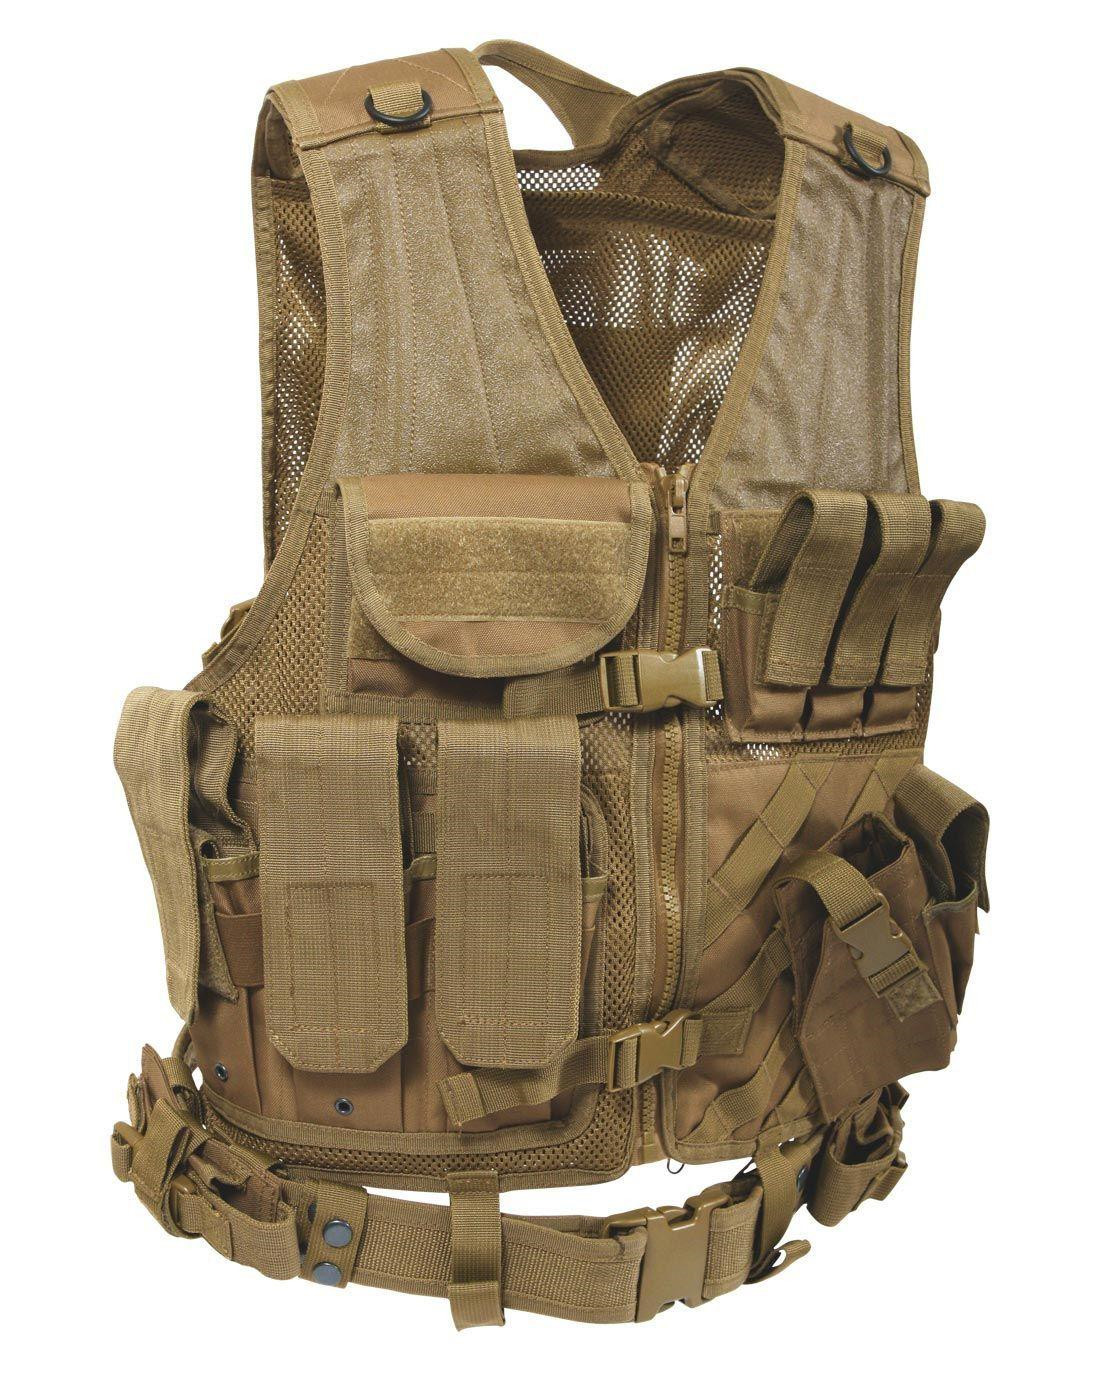 Rothco MOLLE Taktisk Vest - Cross Draw (Coyote Brun, One Size)